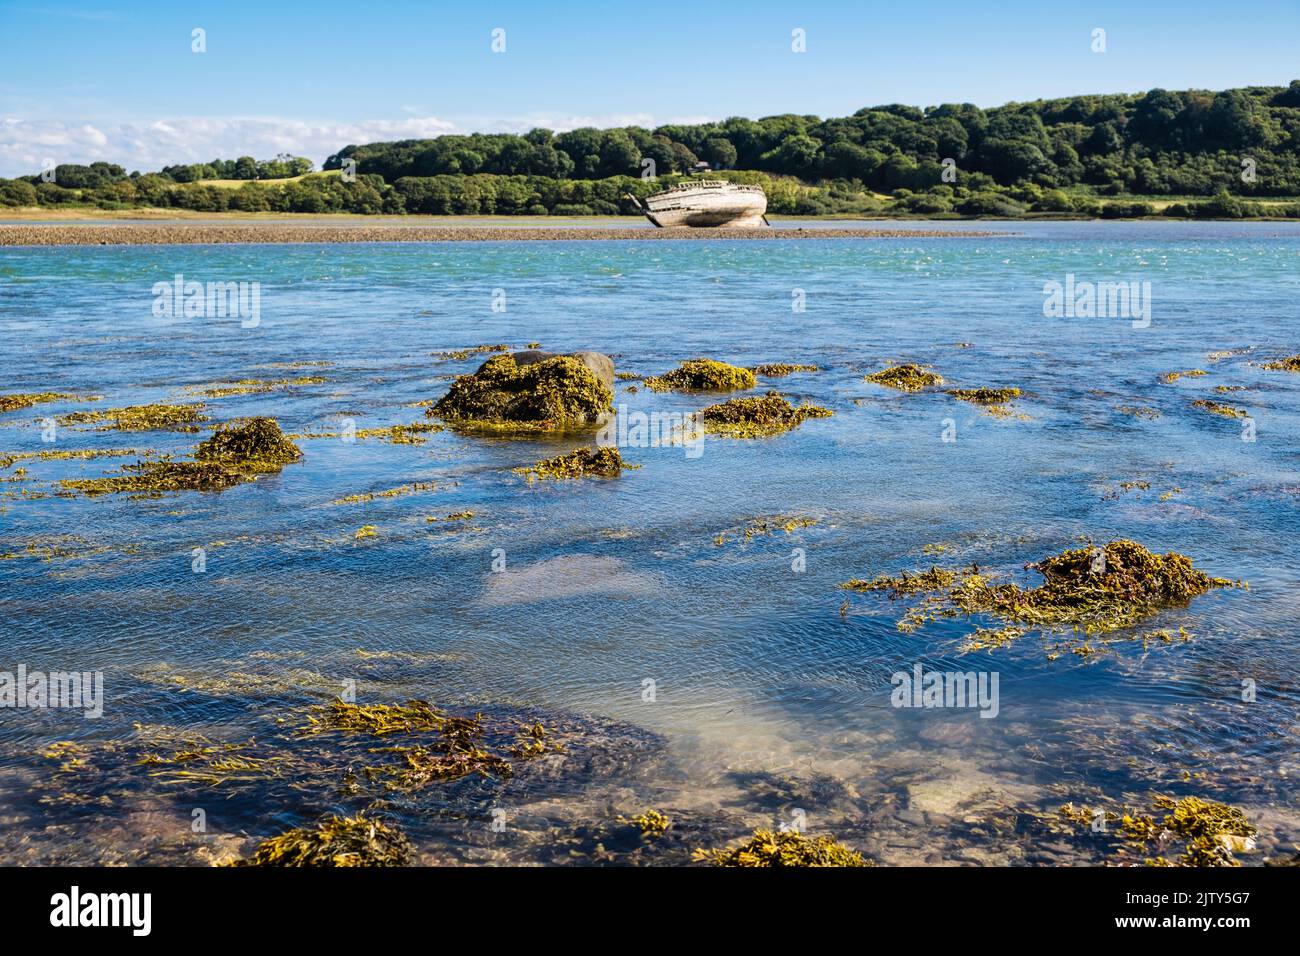 Seaweed on rocks exposed as the tide receeds in the bay. Traeth Dulas, Isle of Anglesey, North Wales, UK, Britain. Stock Photo